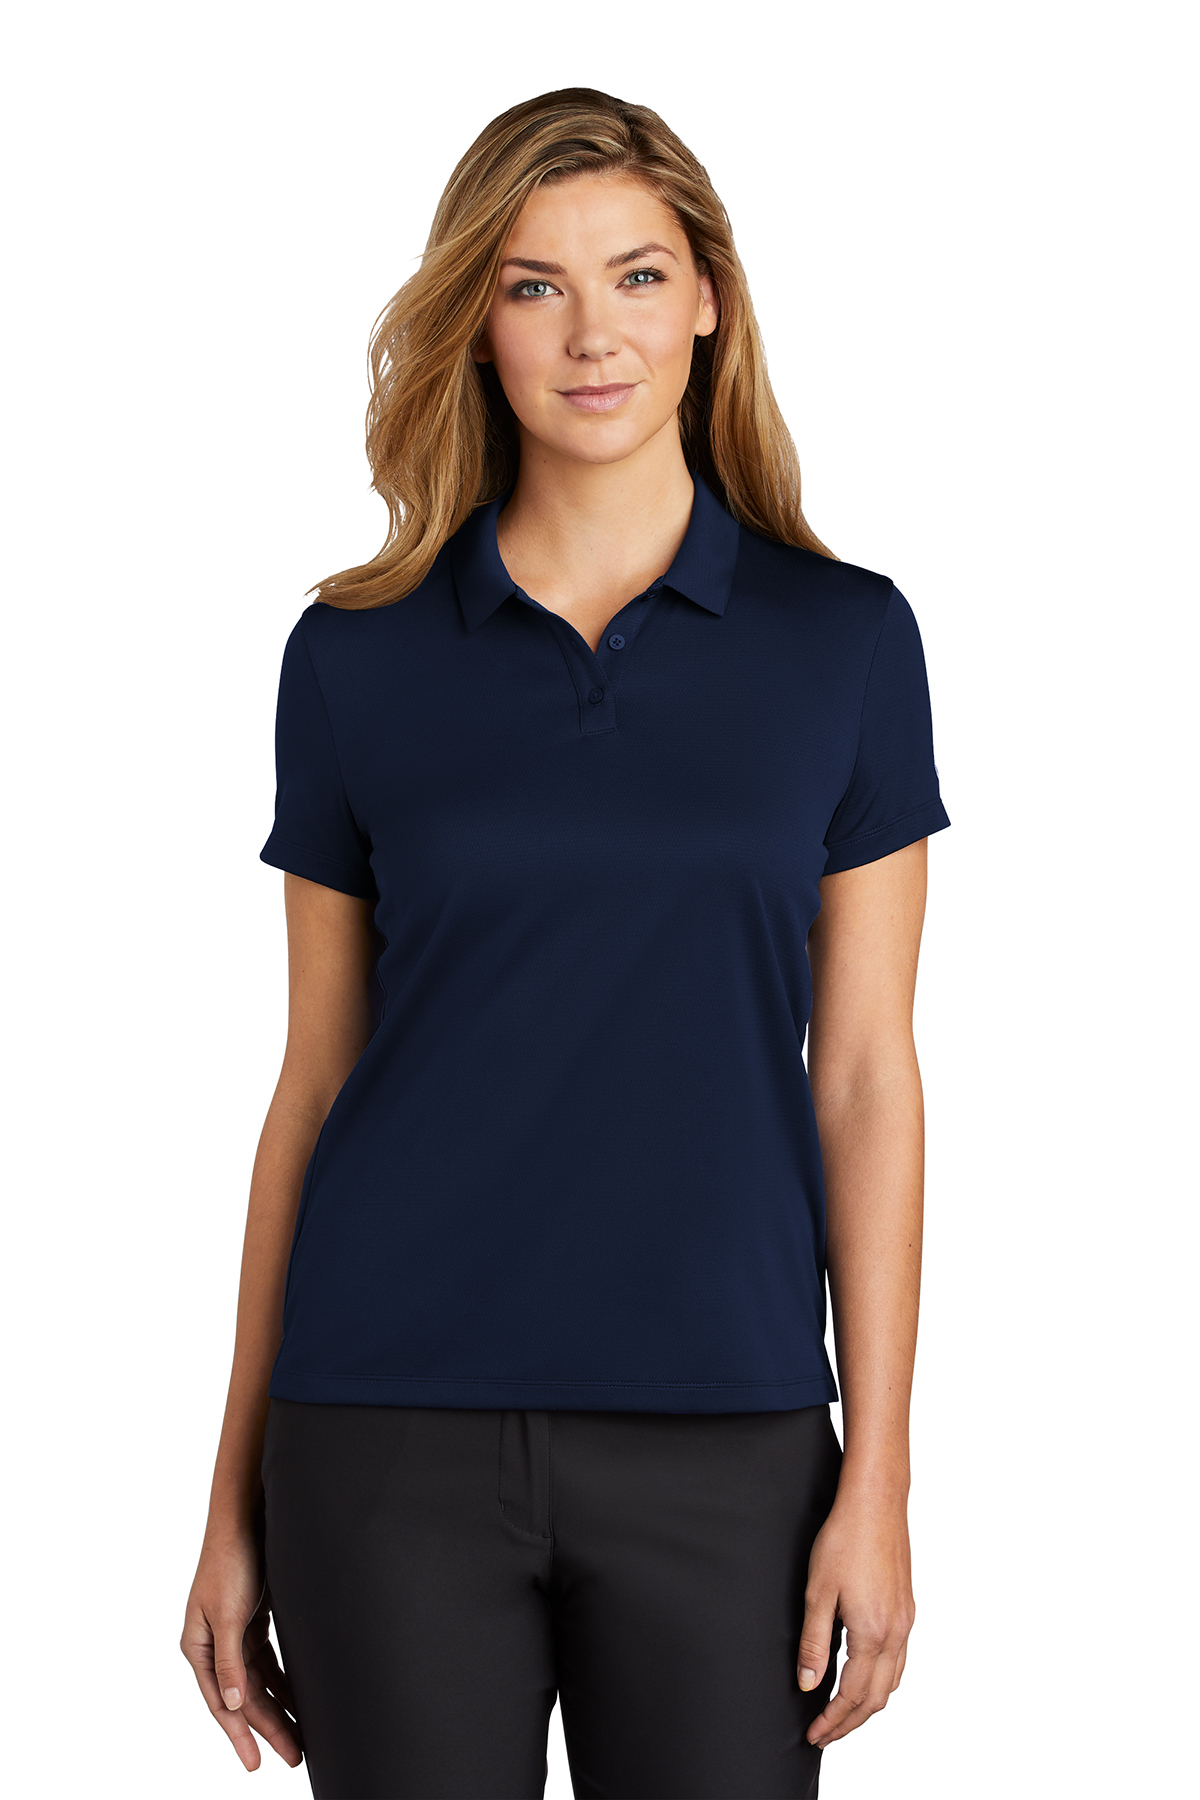 Nike Ladies Dry Essential Solid Polo | Product | SanMar